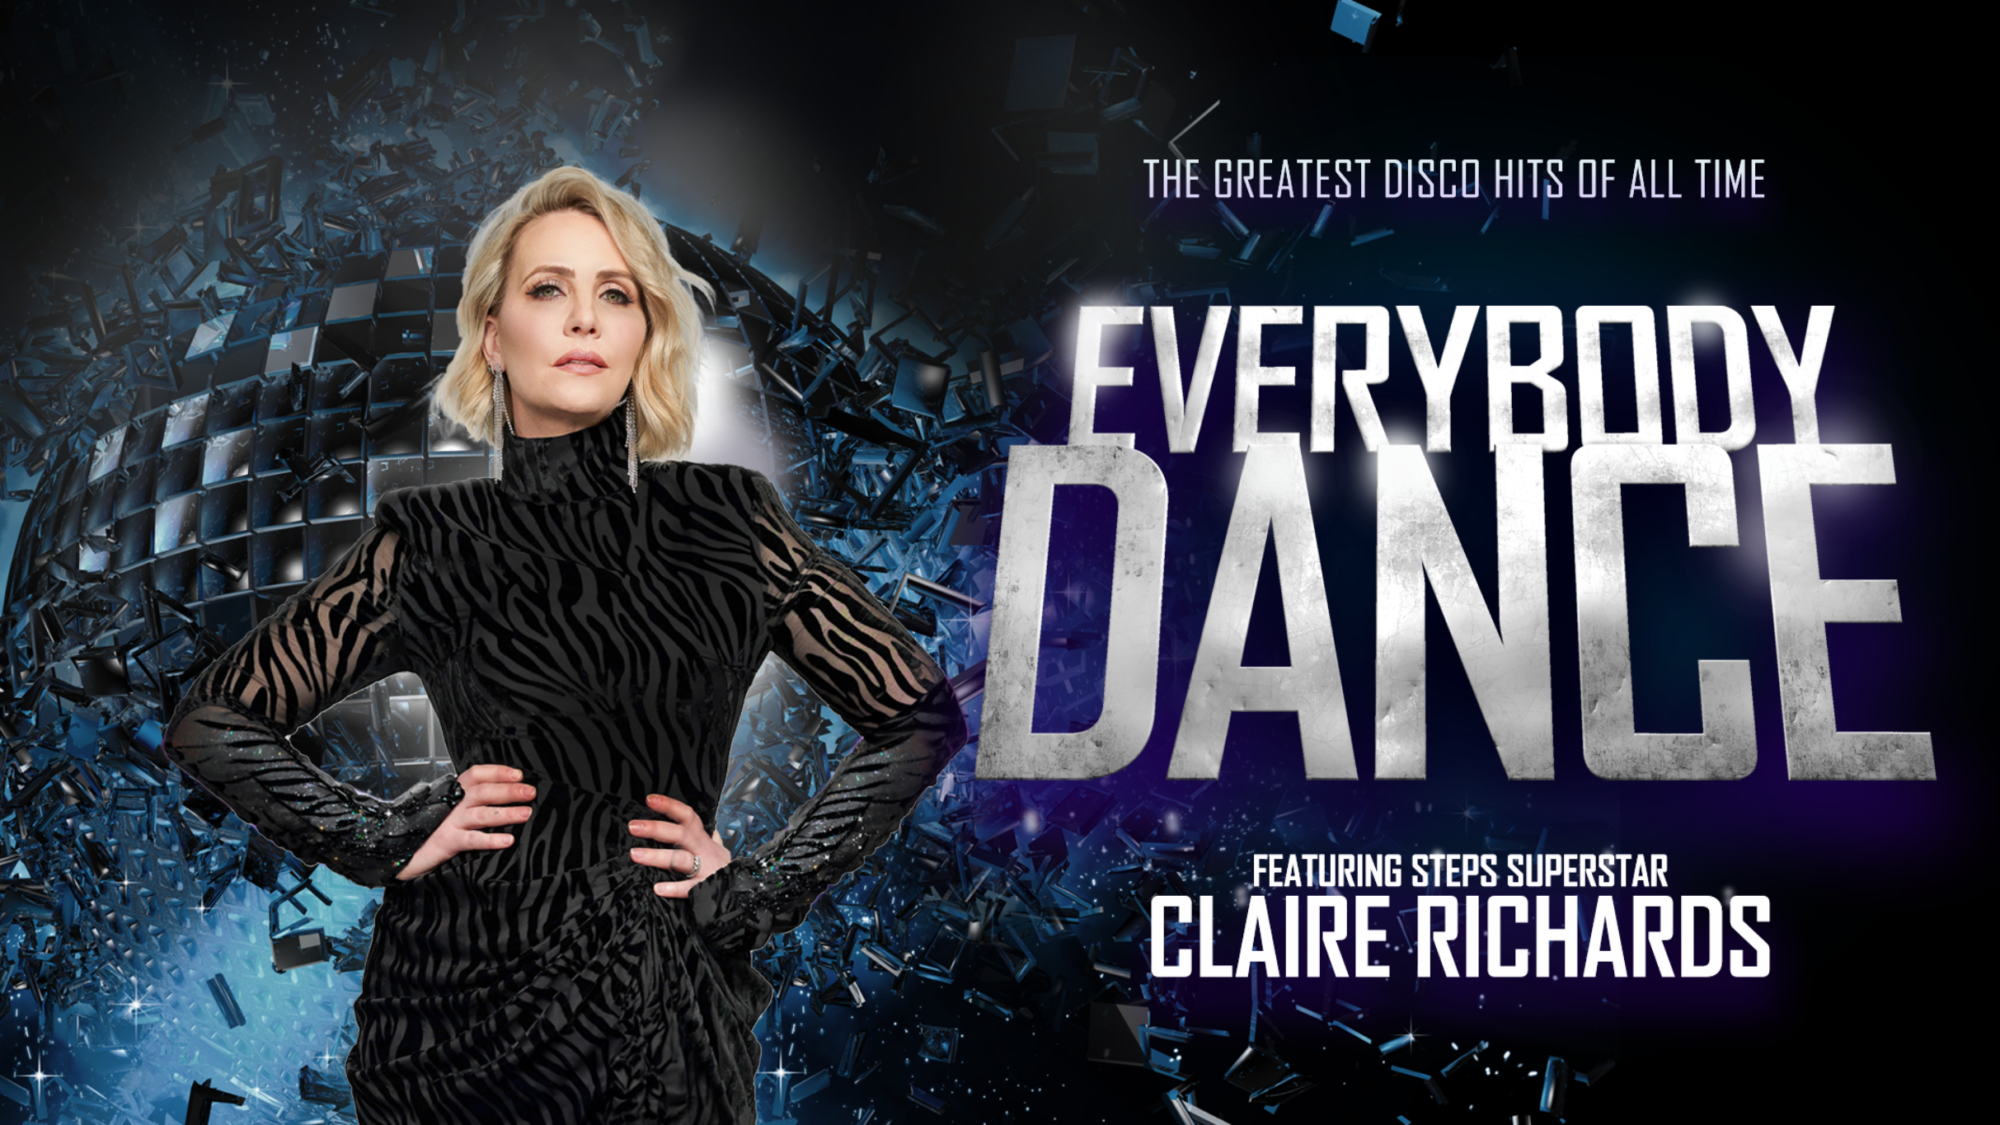 Image name Everybody Dance with Claire Richards at Hull City Hall Hull the 9 image from the post Events in Yorkshire.com.